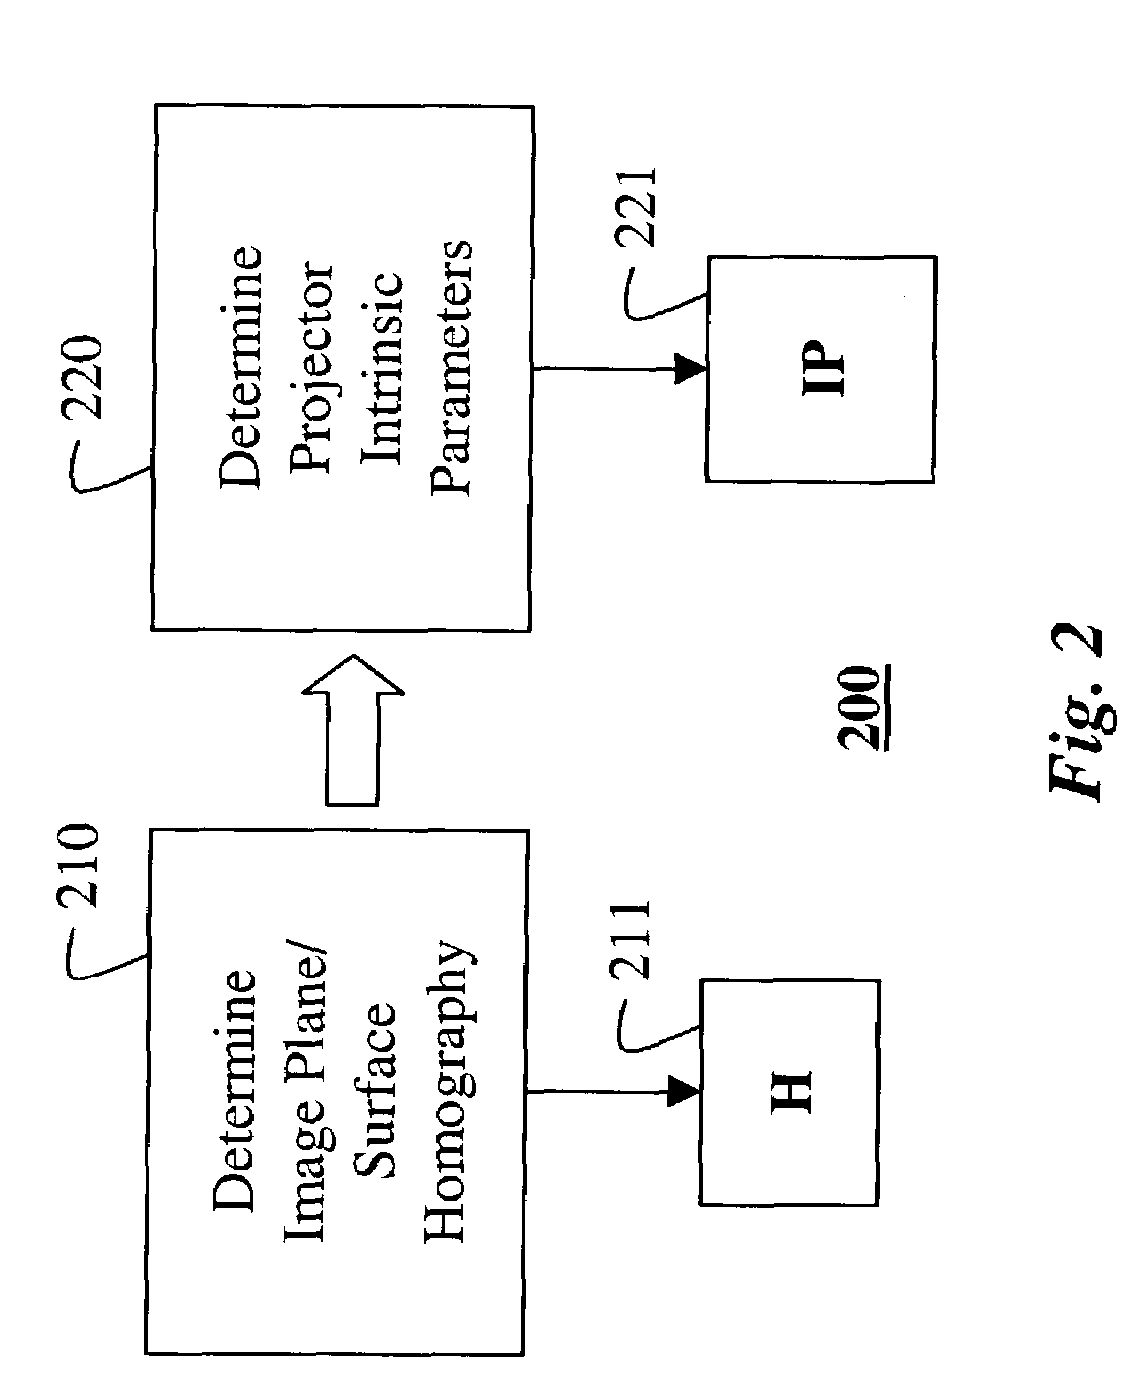 Position and orientation sensing with a projector